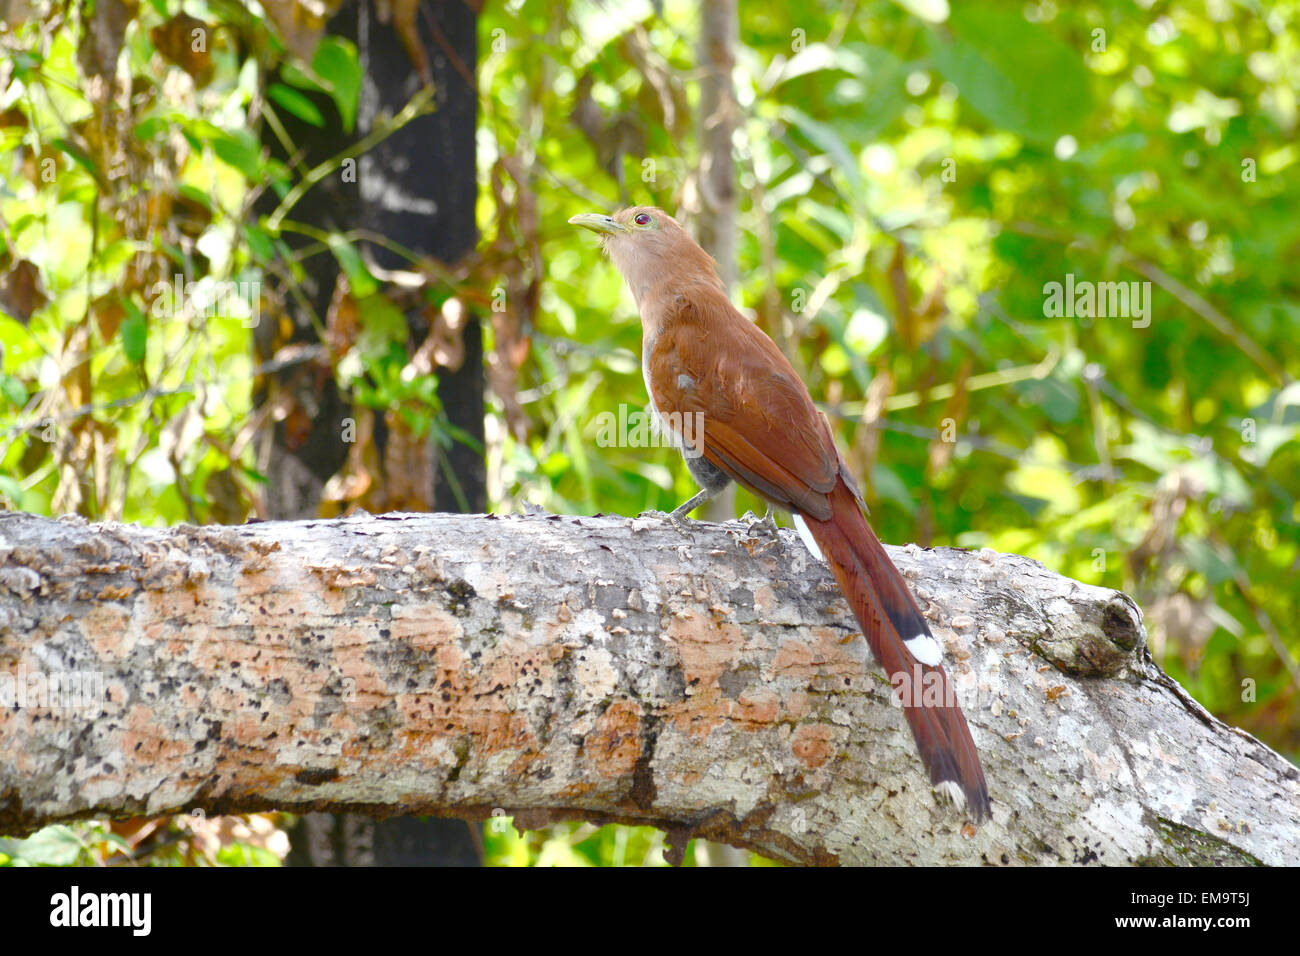 Beautiful Squirrel Cuckoo (Piaya cayana) bird on a fallen tree branch in the forest of Panama Stock Photo